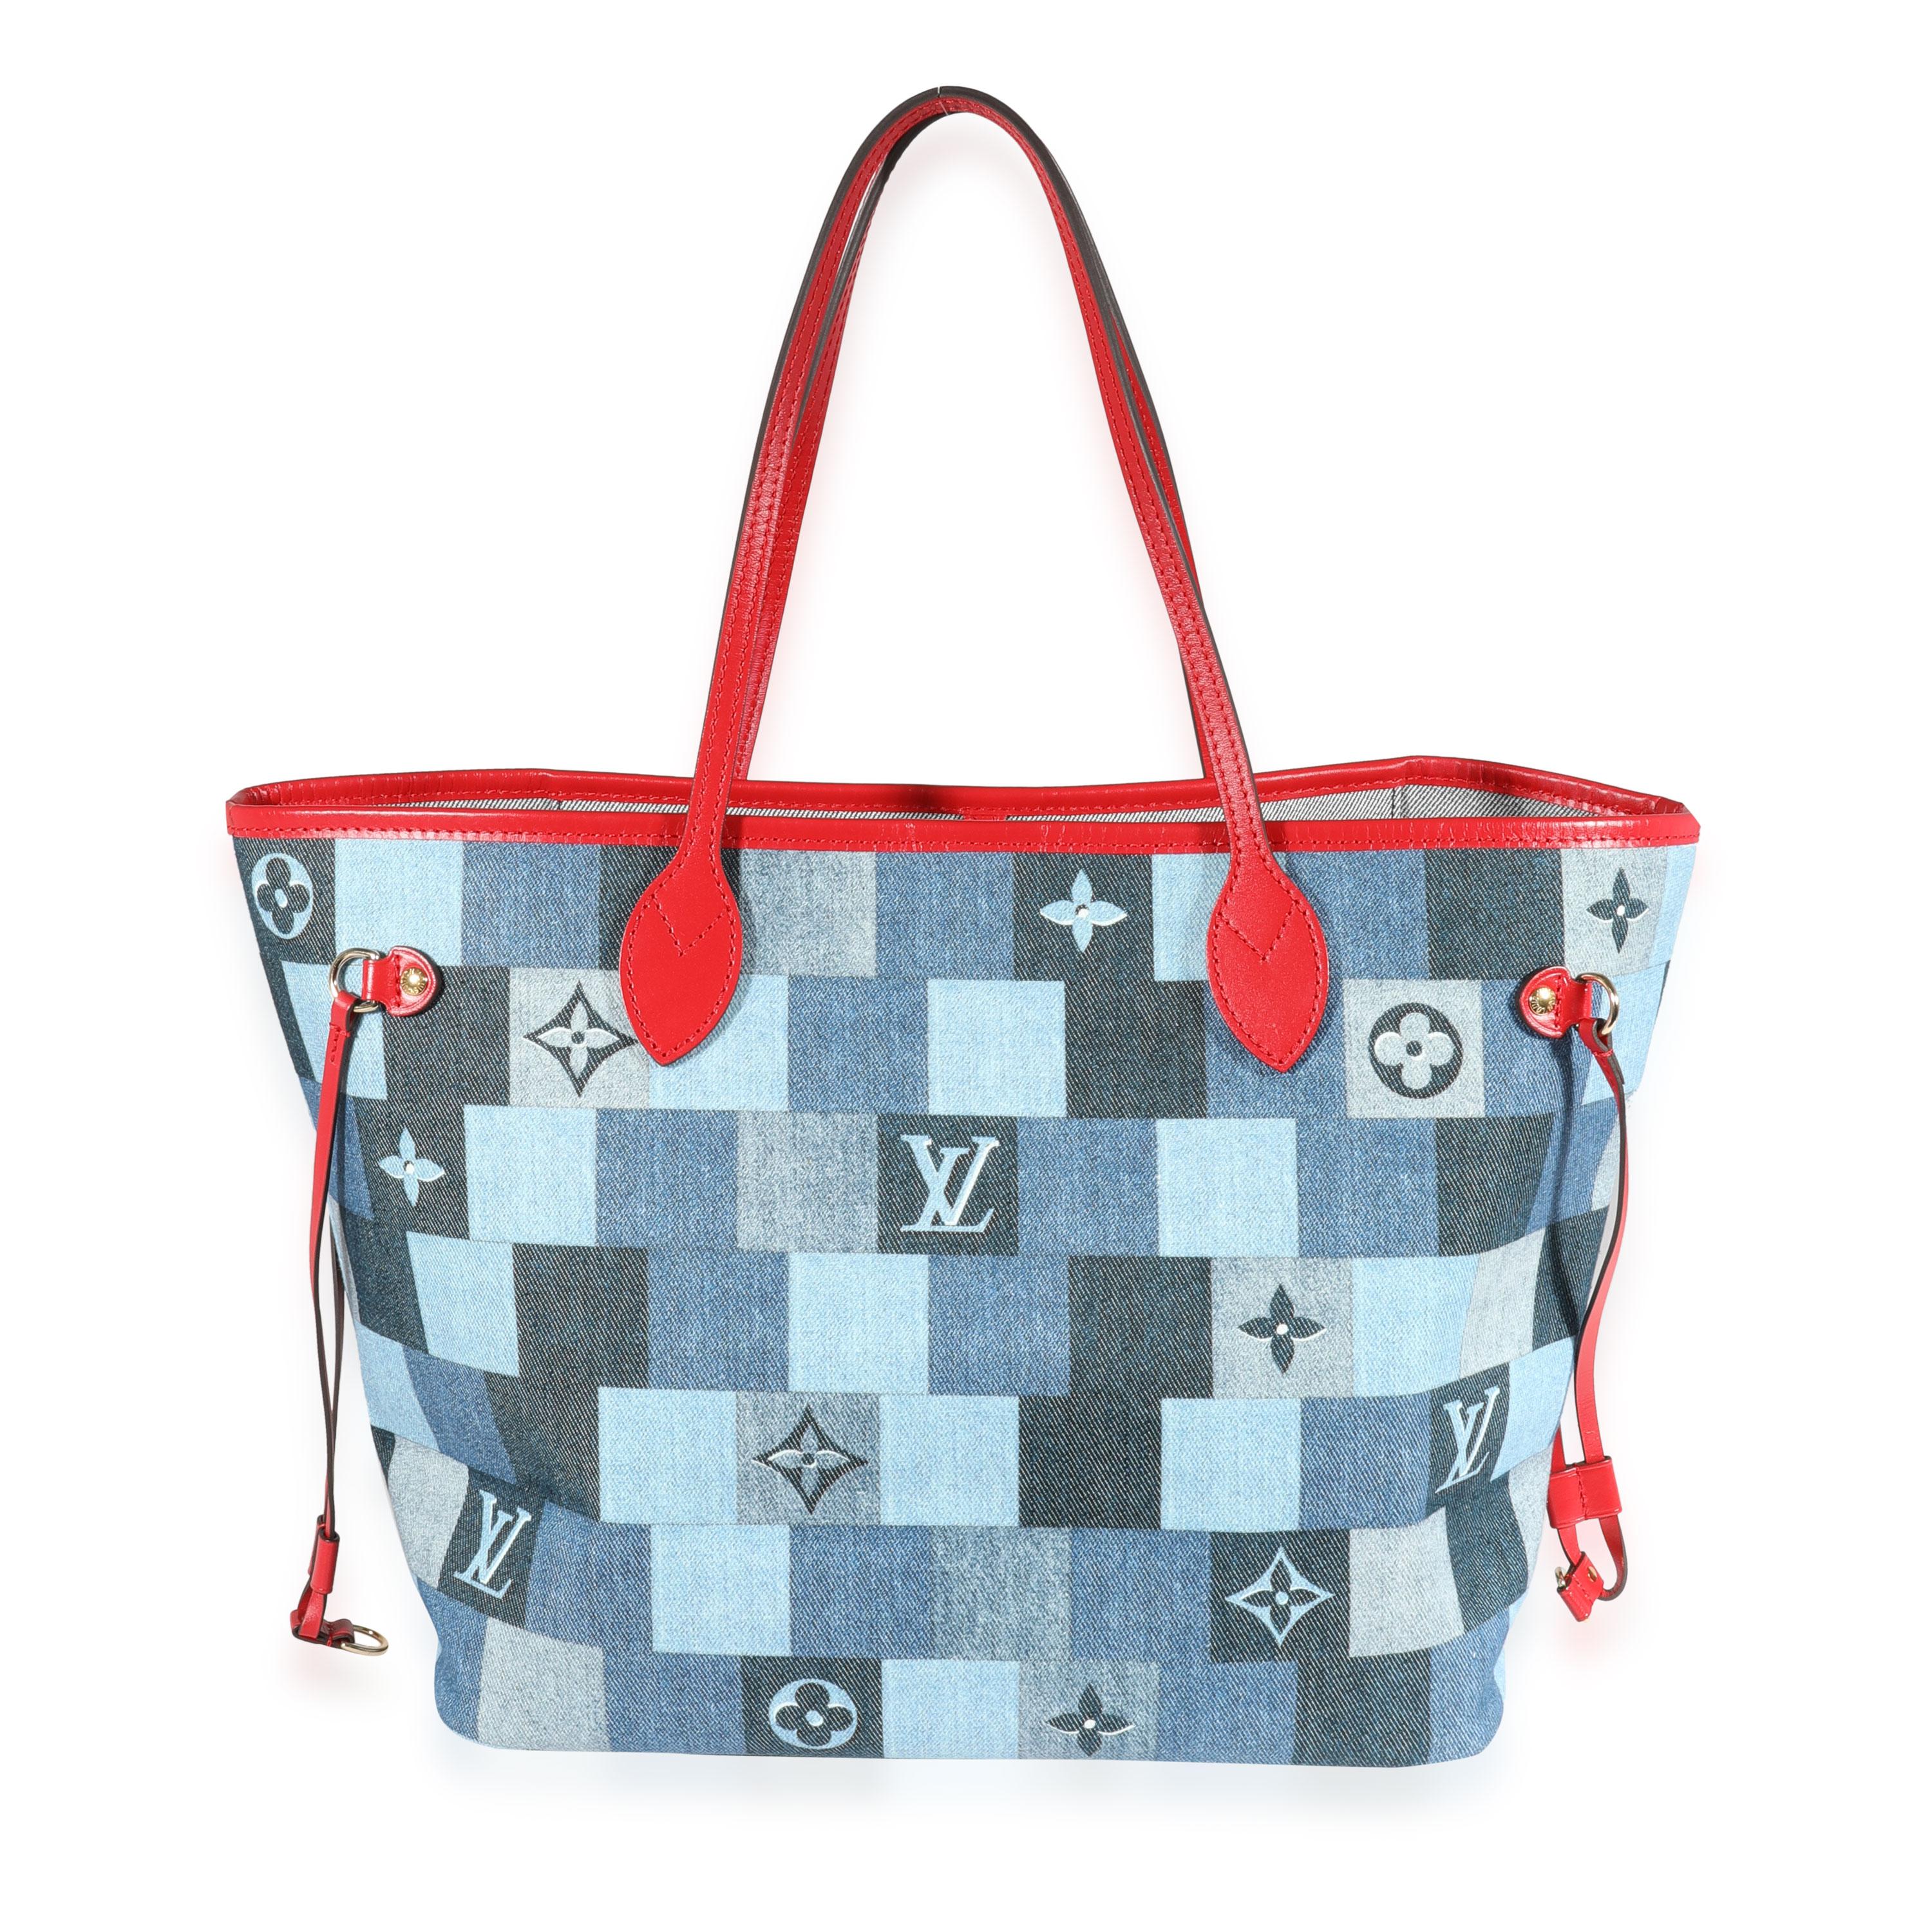 Listing Title: Louis Vuitton Blue Denim Monogram Patchwork Neverfull MM
SKU: 121831
Condition: Pre-owned 
Handbag Condition: Excellent
Condition Comments: Excellent Condition. No visible signs of wear.
Brand: Louis Vuitton
Model: Neverfull
Origin